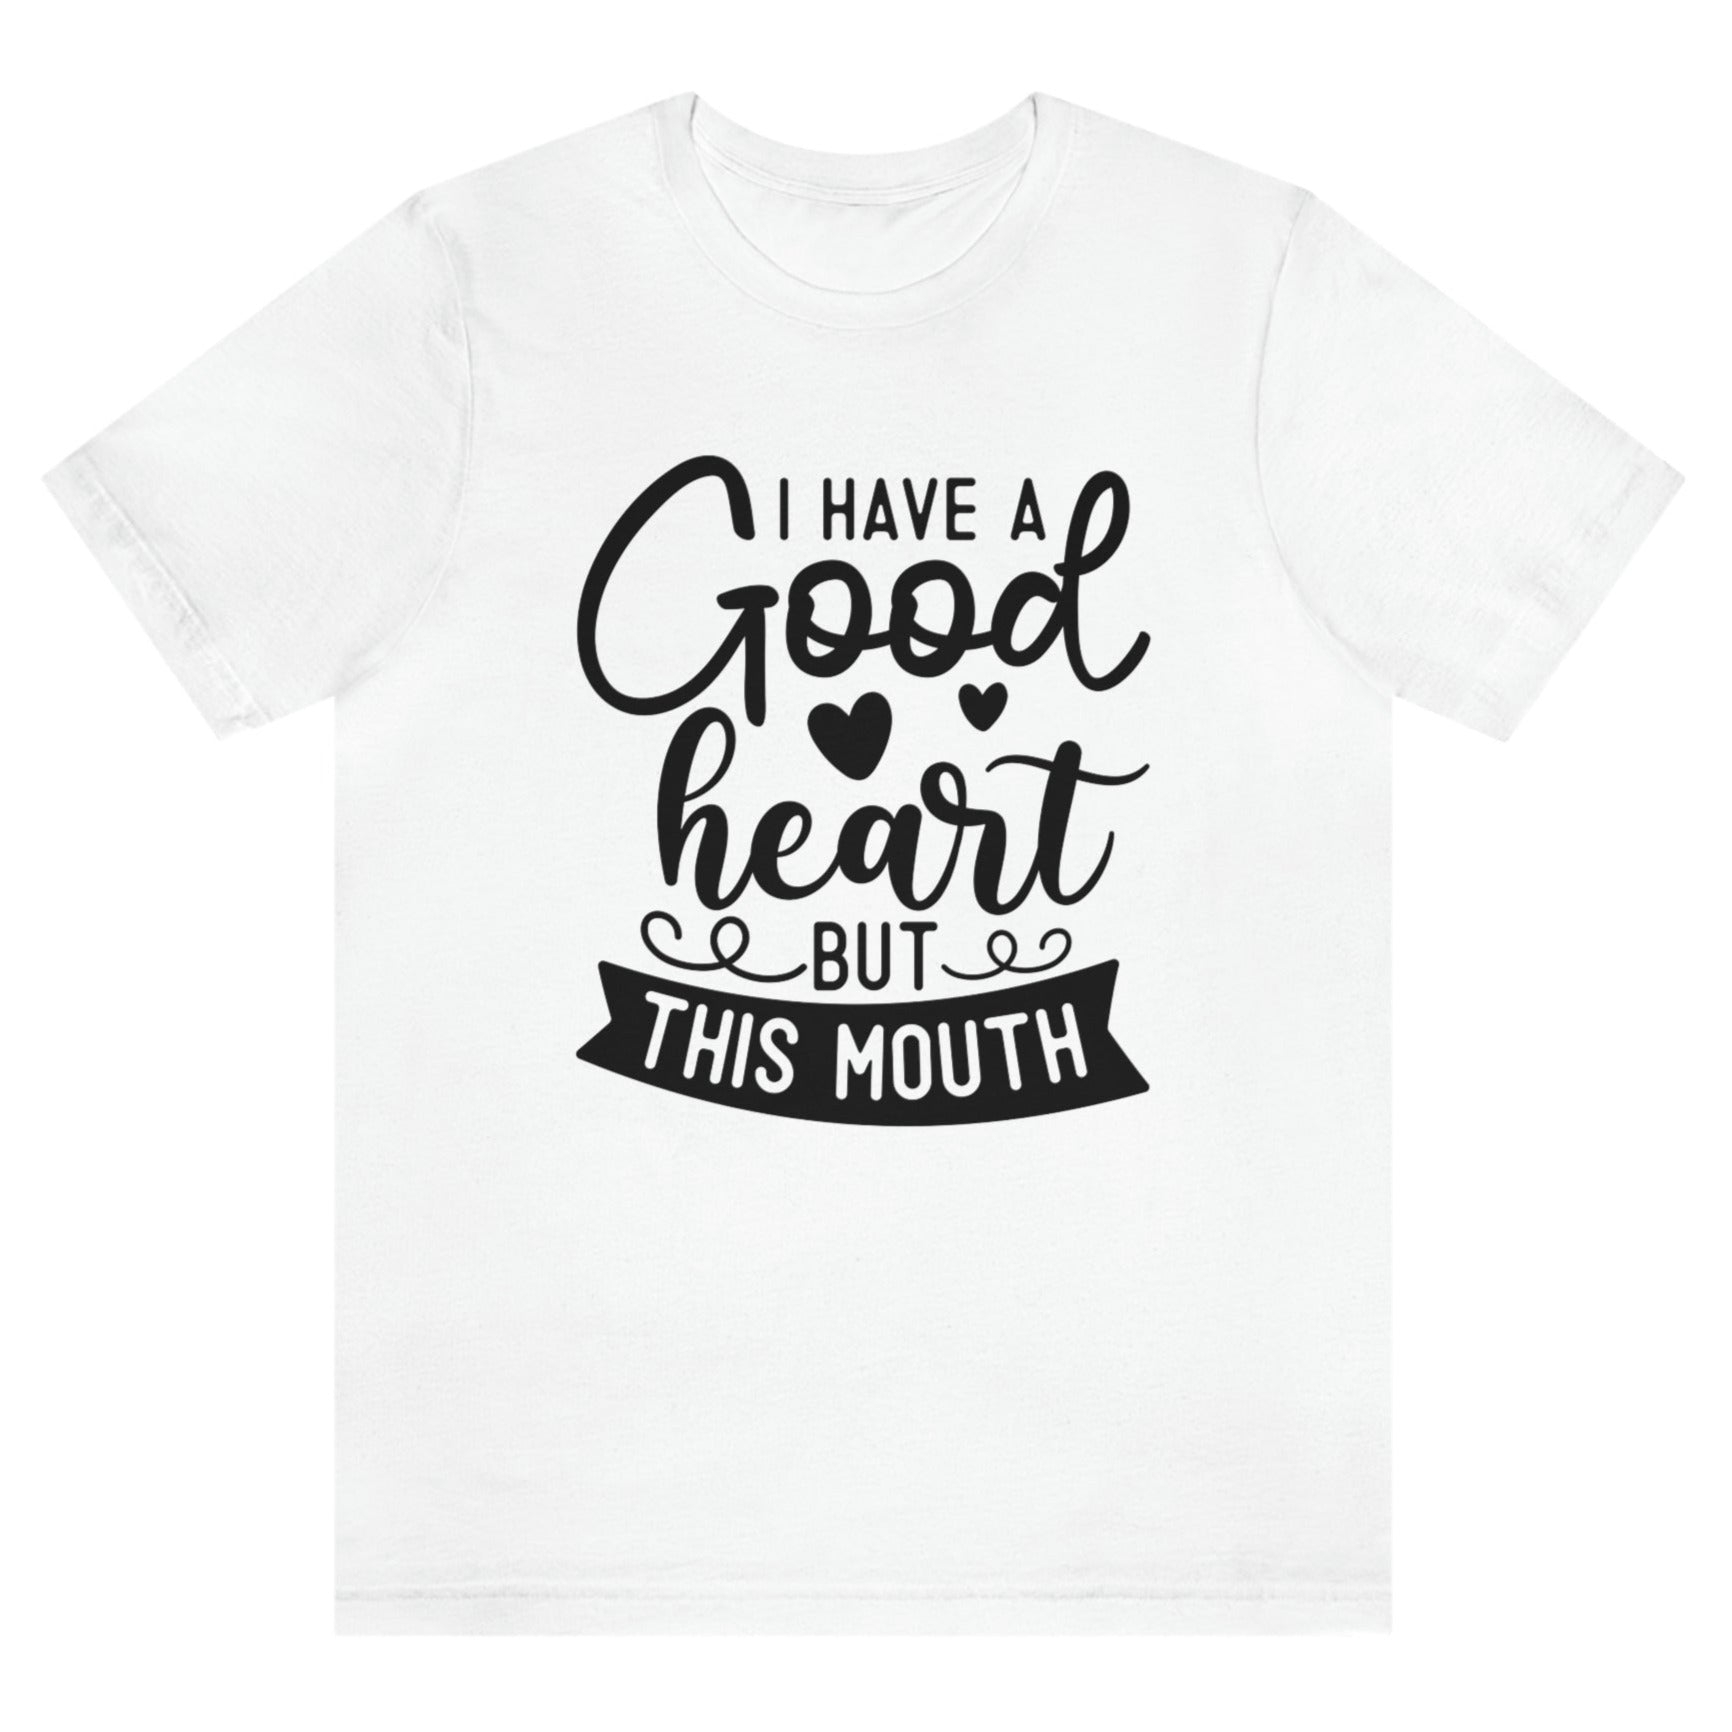 i-have-a-good-heart-but-this-mouth-white-t-shirt-women-sarcastic-funny